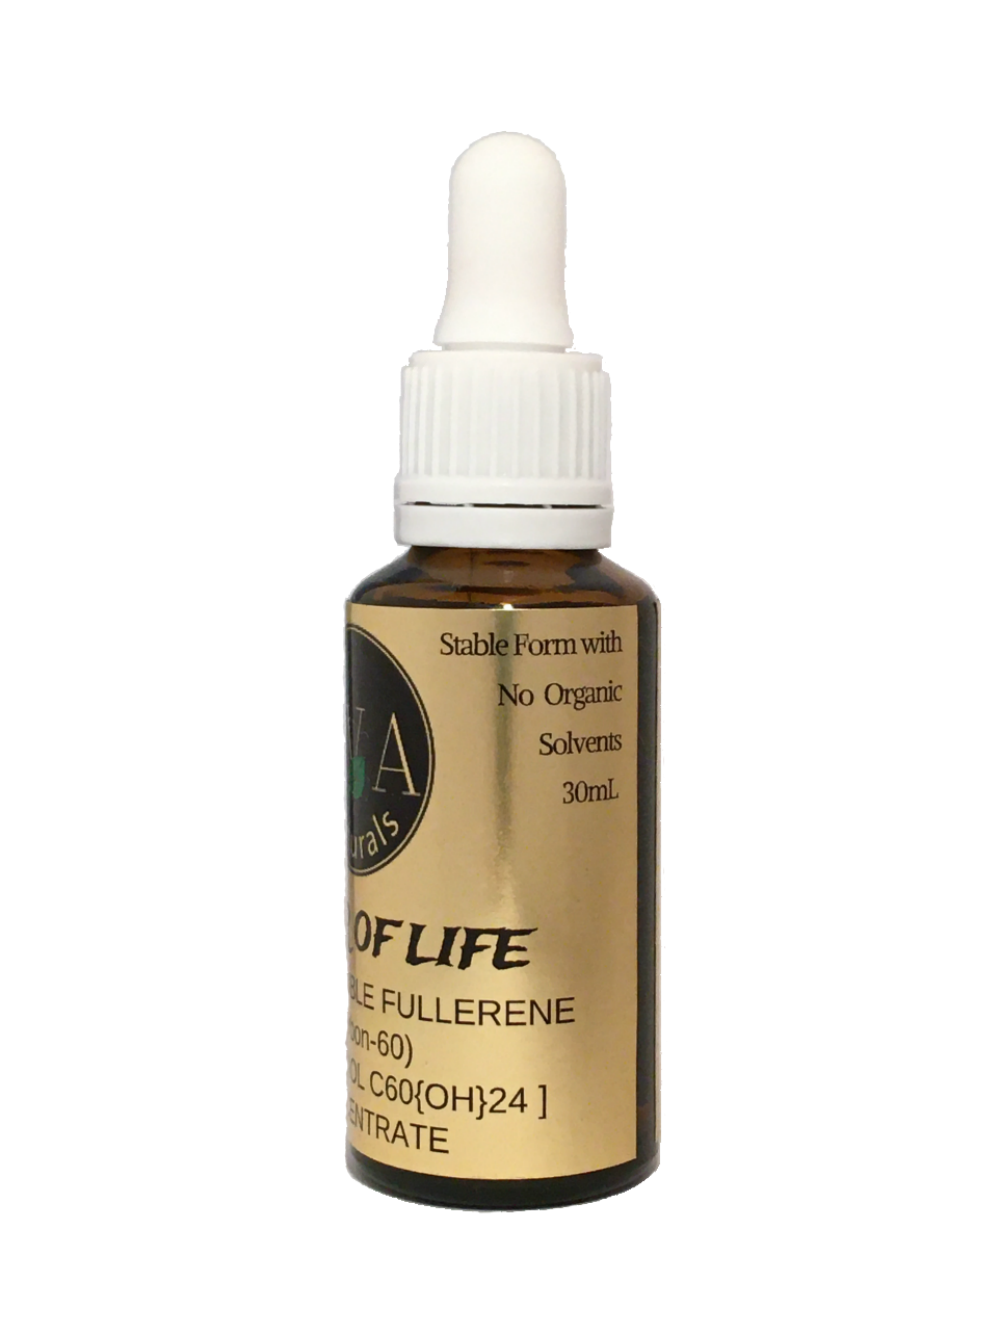 Elixir of Life - Water Soluble Carbon-60 Concentrate - Antioxidant (30mL)  (US Dollar)